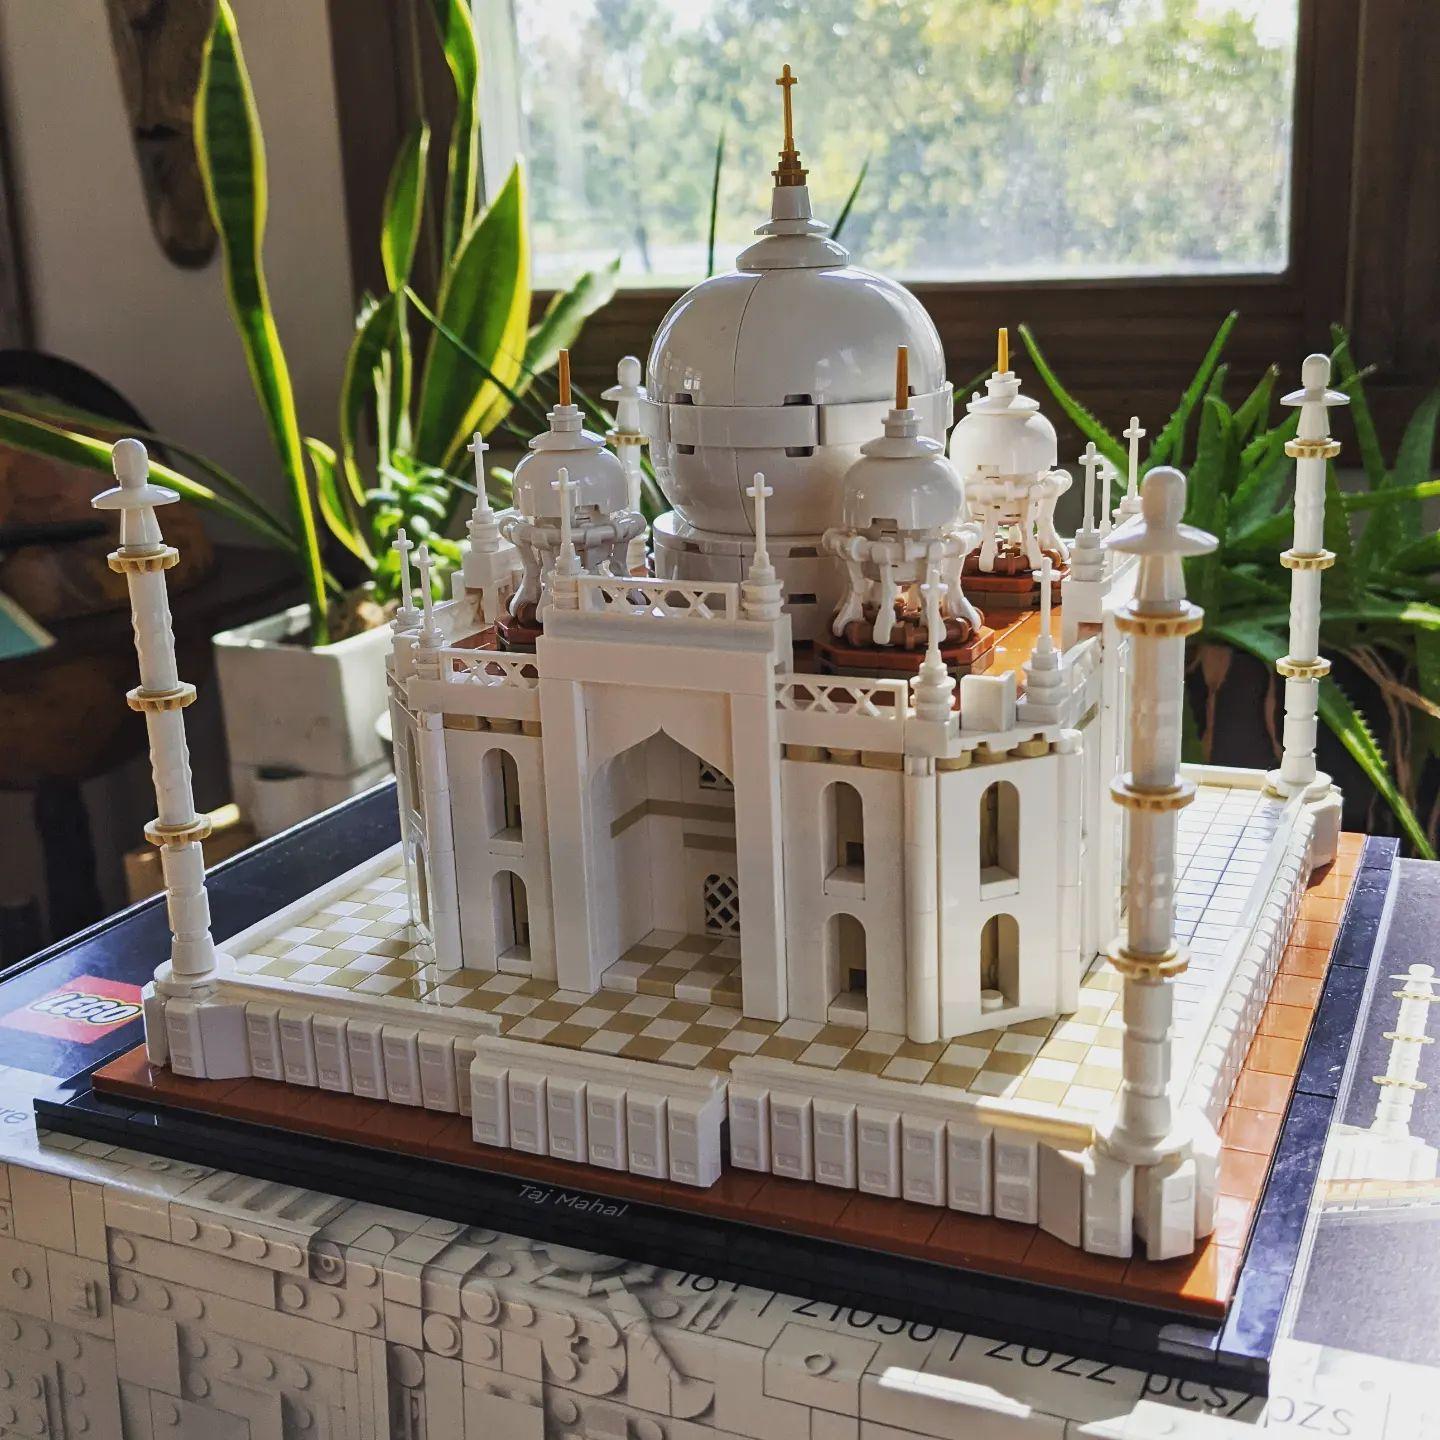 Wholesale Lego Taj Mahal Of Different Designs And Themes 